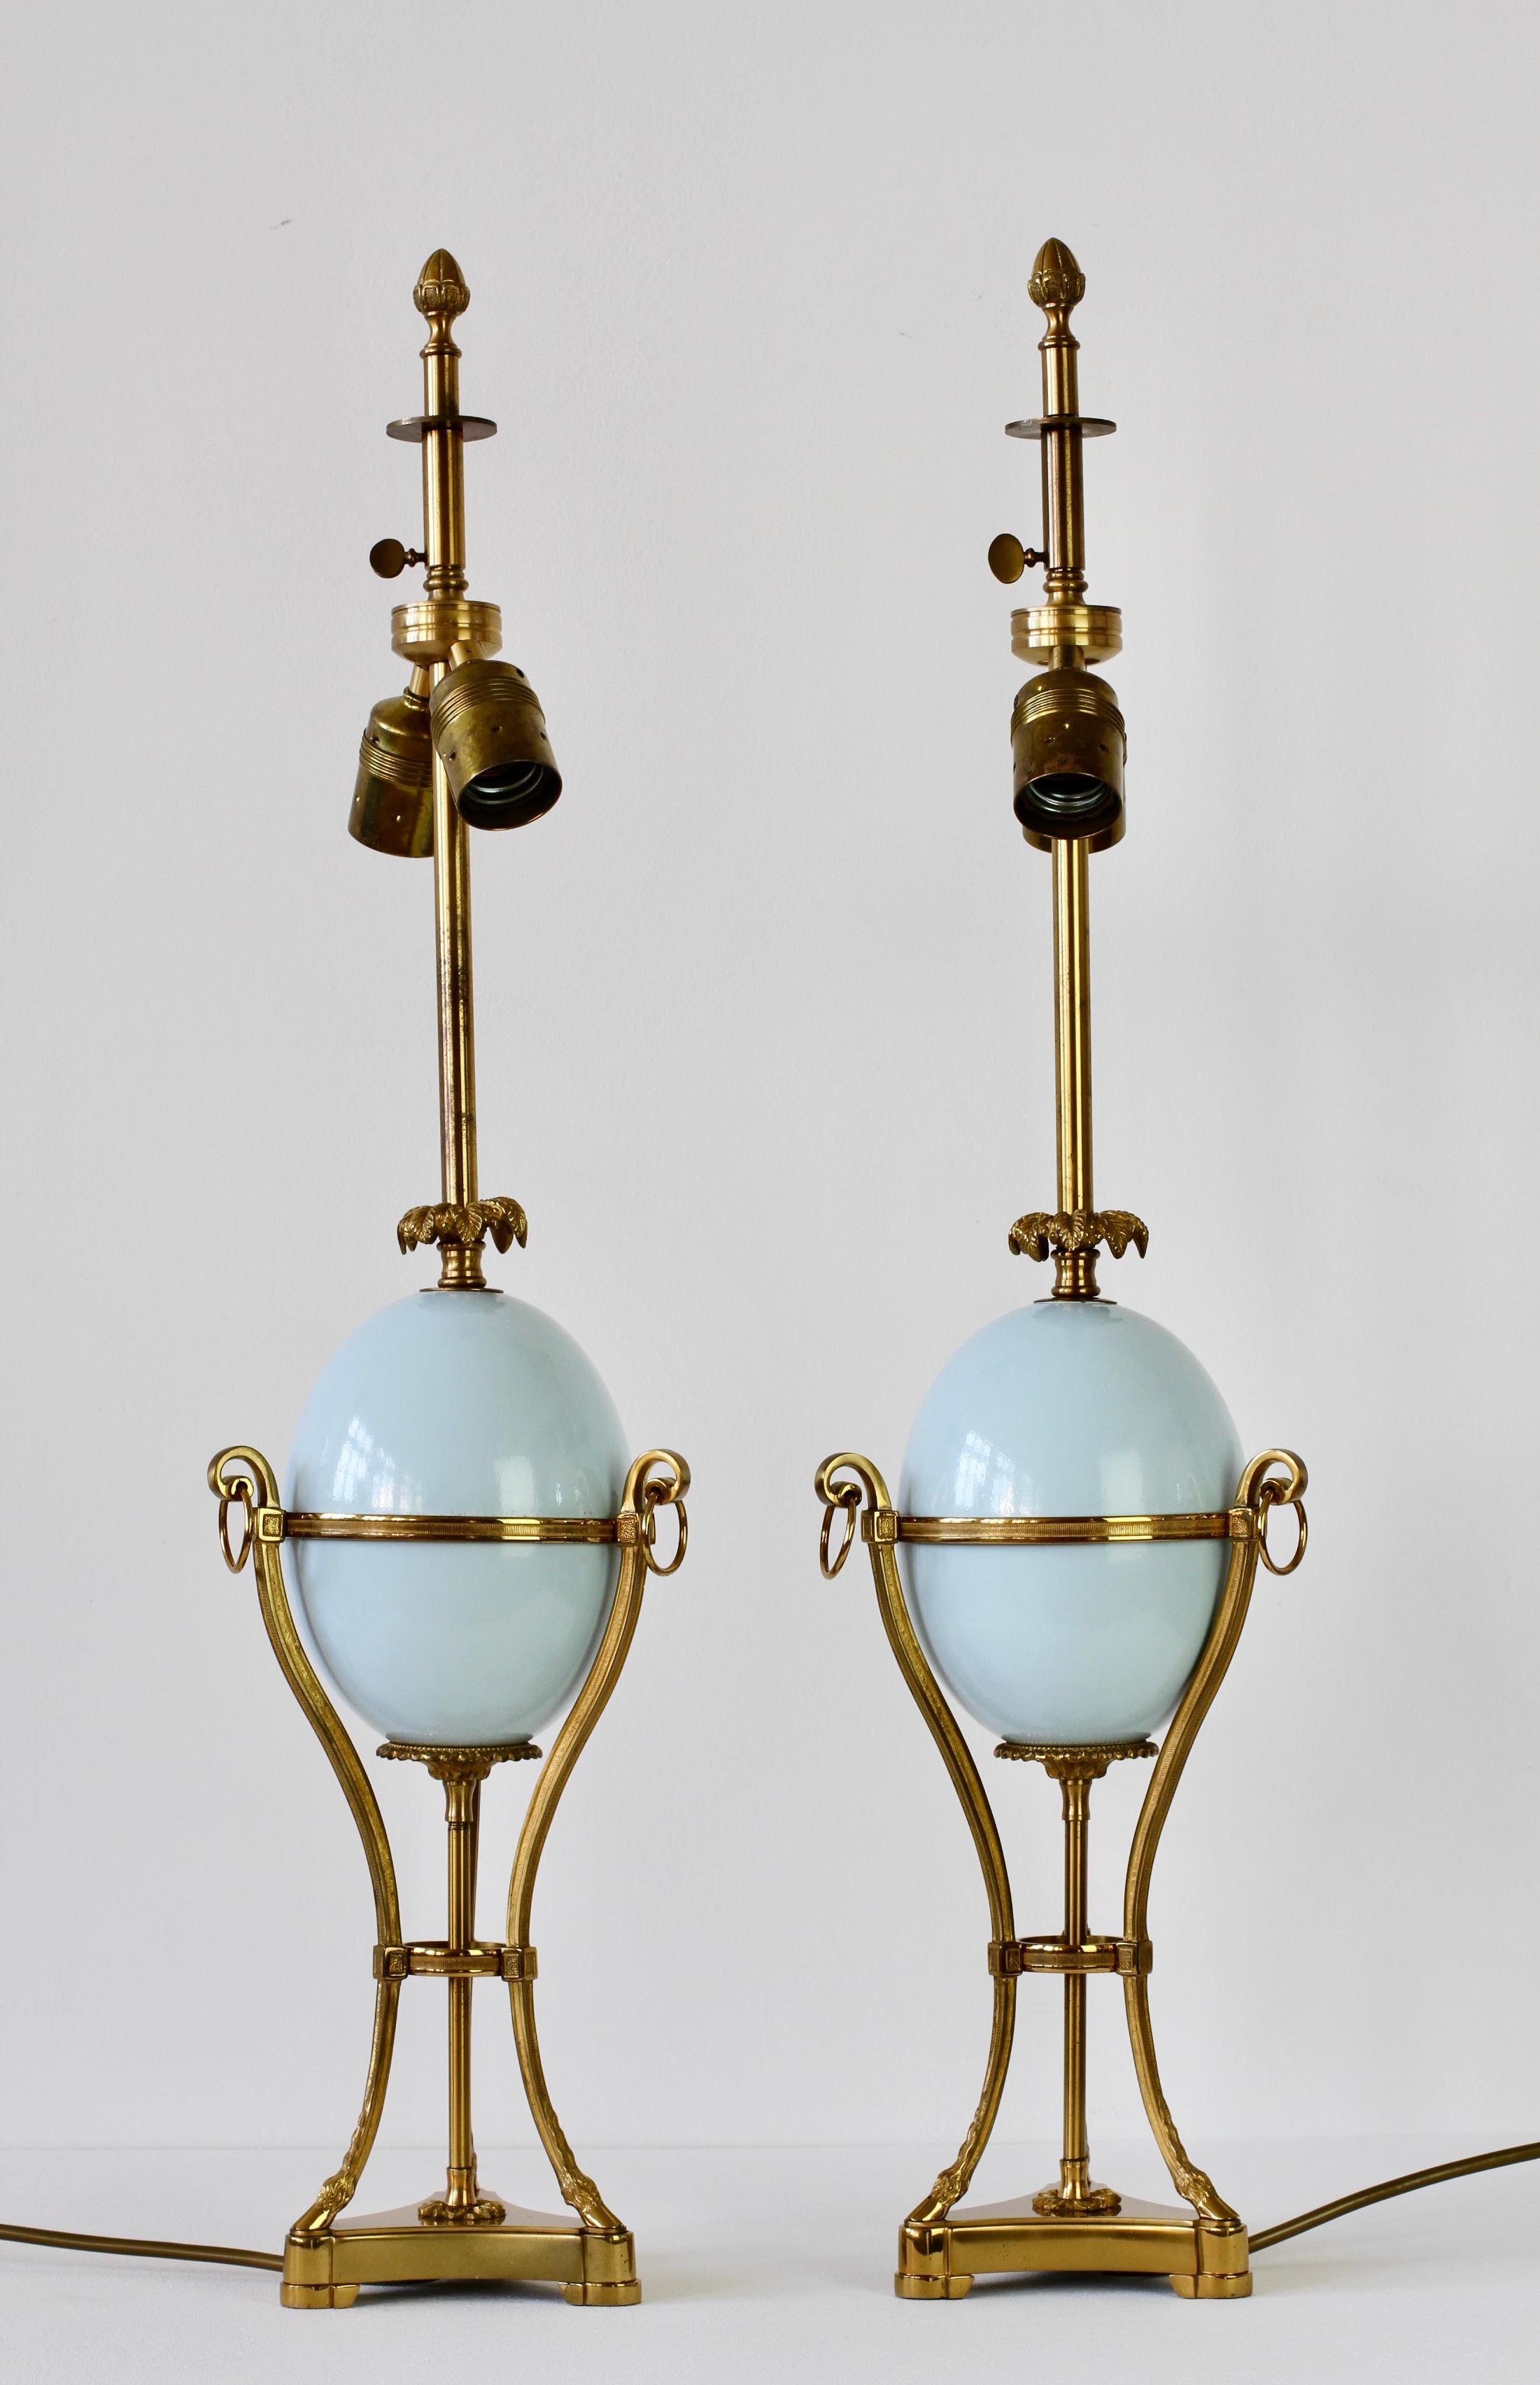 Maison Charles attributed midcentury vintage pair of French gilt bronze neoclassical lamps centered on ostrich eggs. Stunning craftsmanship with beautifully cast brass elements, the palm leaf details above the powder blue eggs, the acorn final on